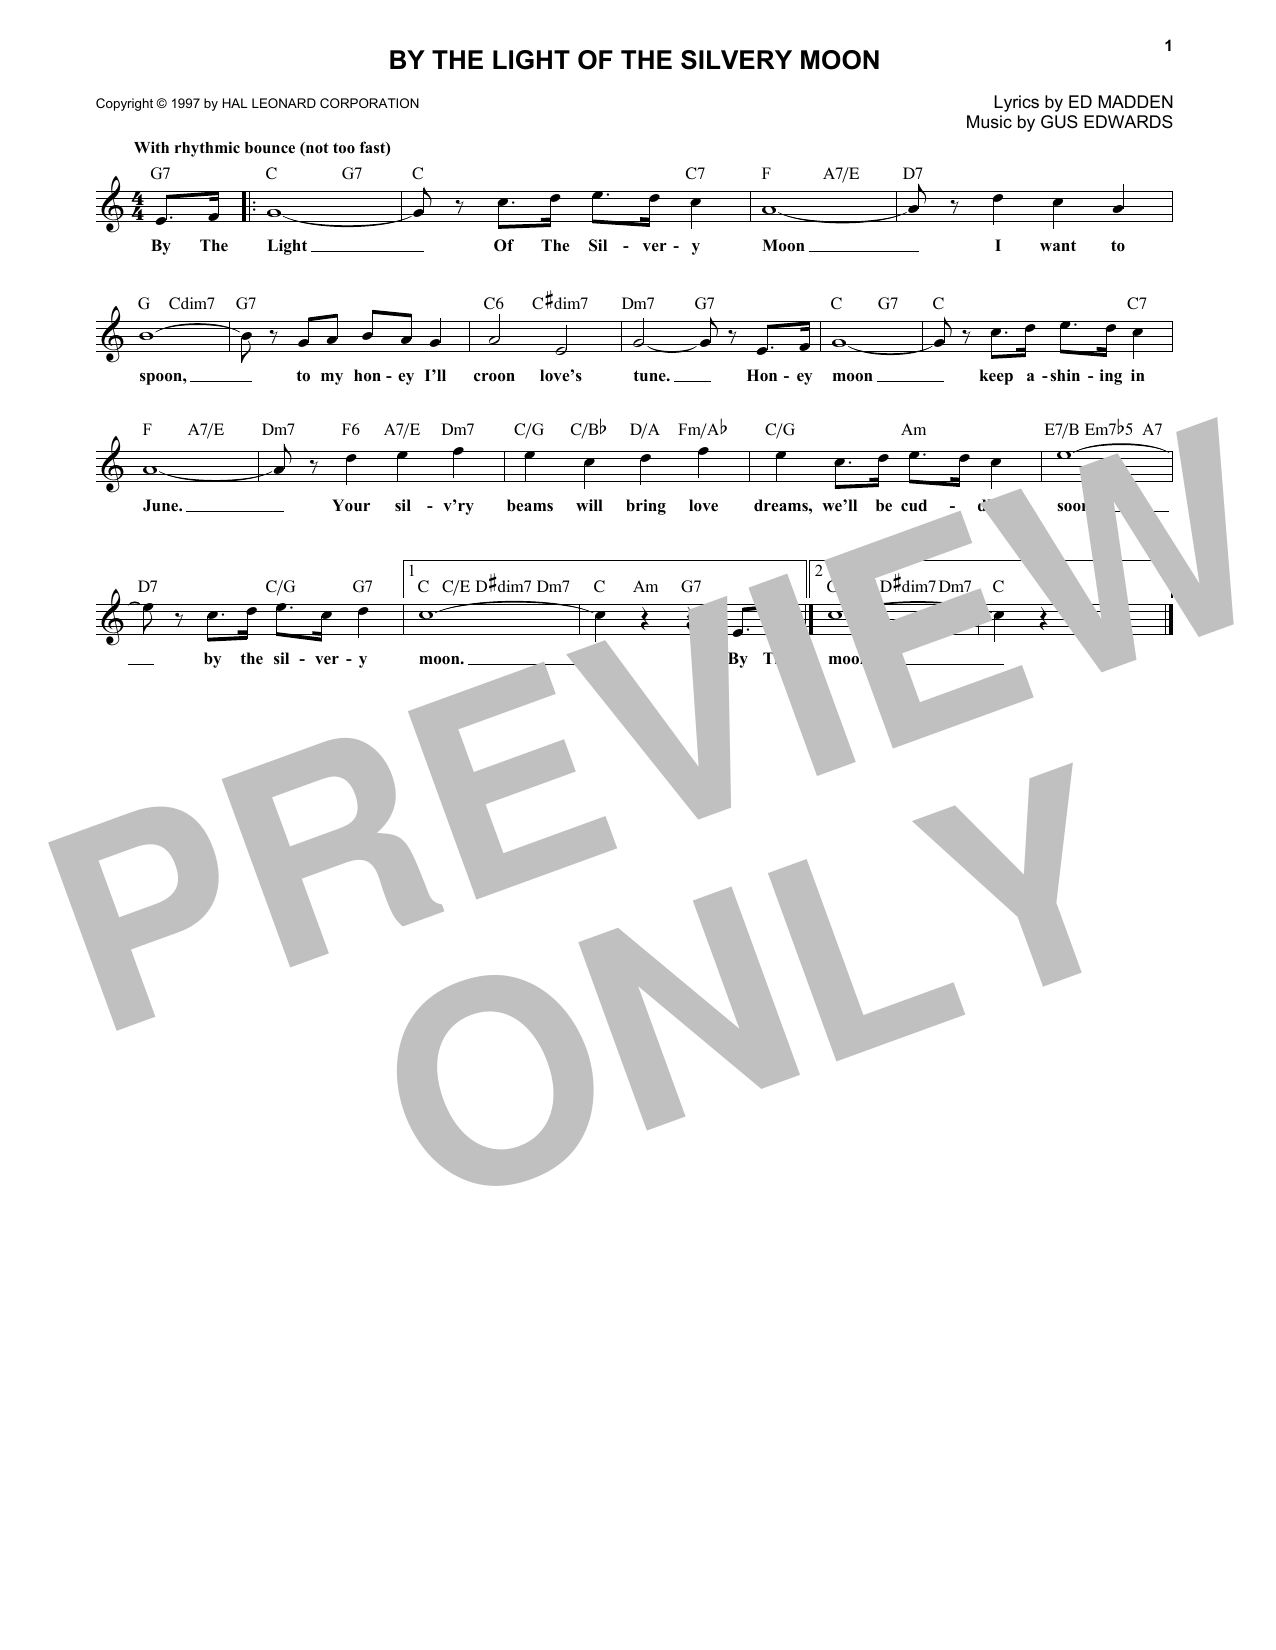 Download Gus Edwards By The Light Of The Silvery Moon Sheet Music